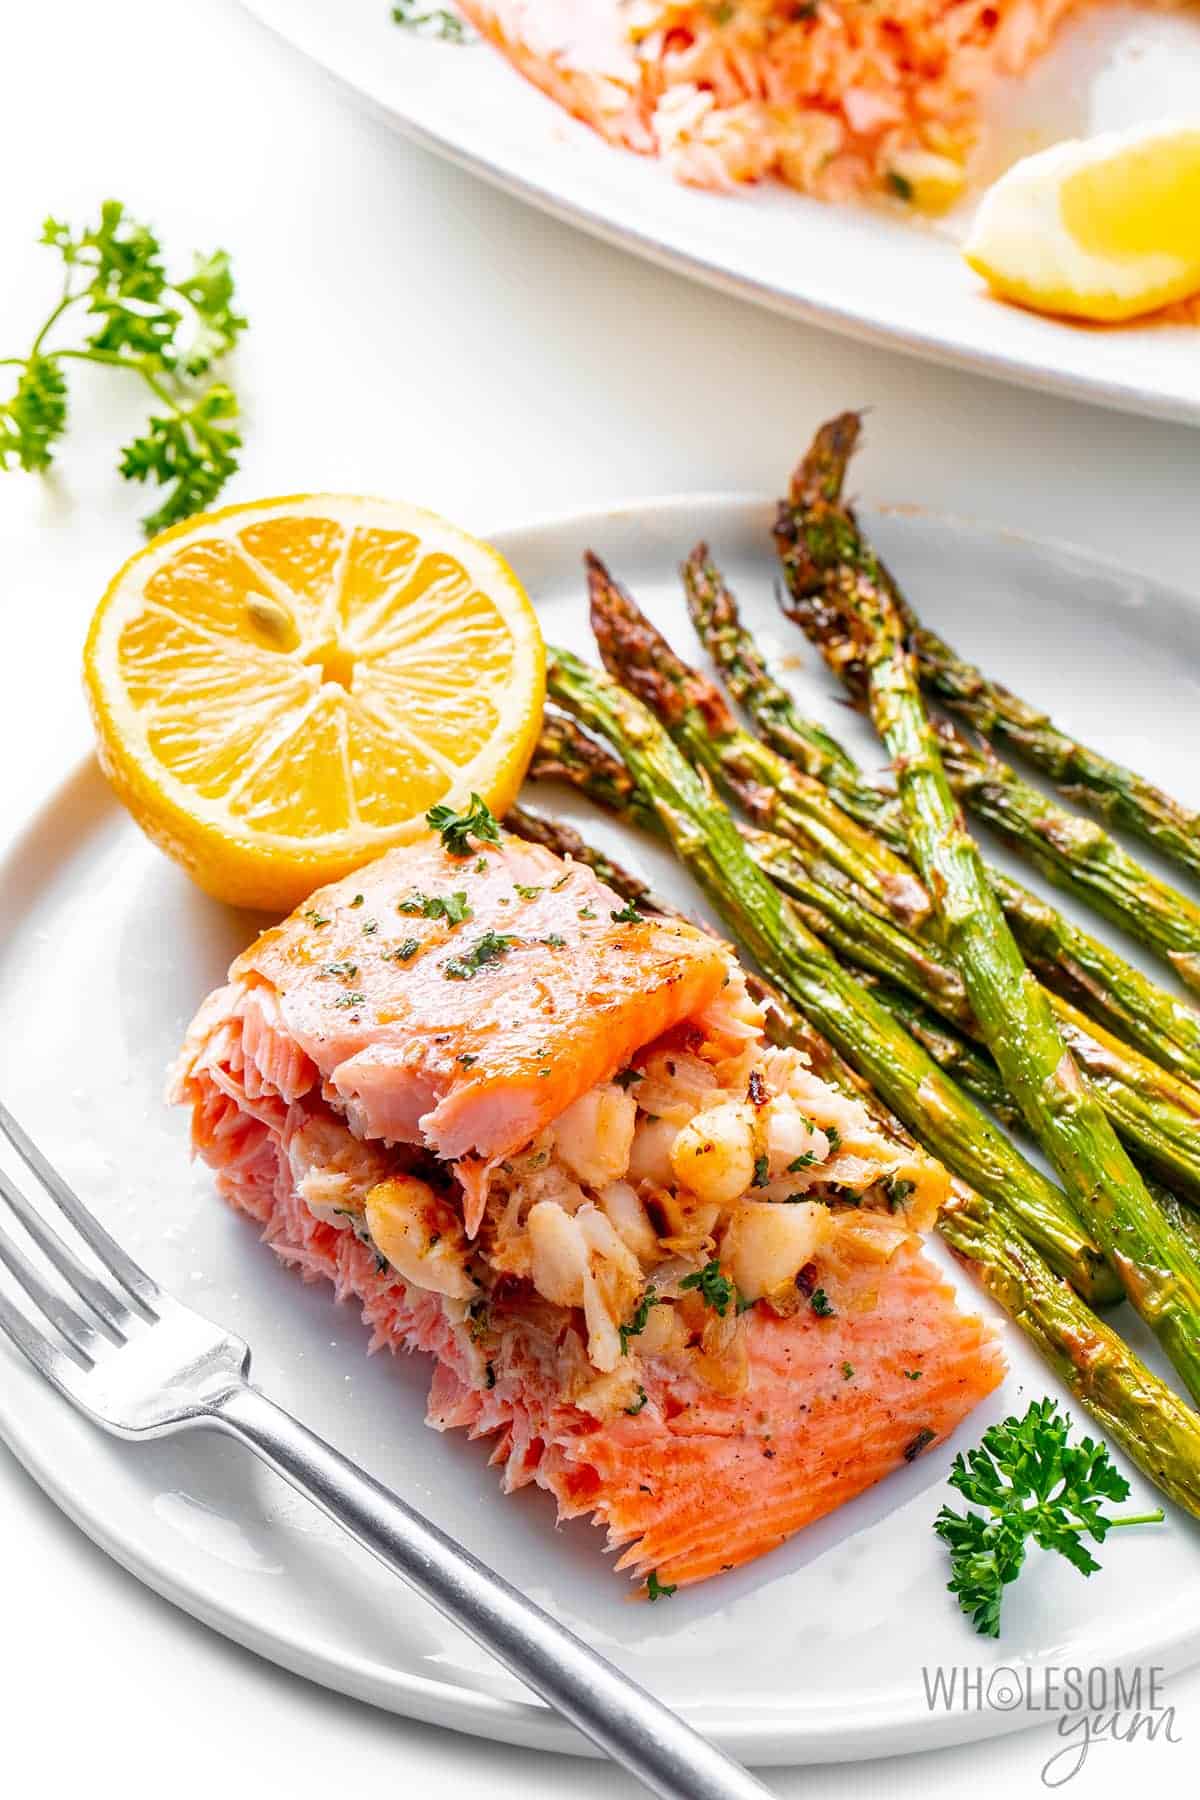 Plated crab stuffed salmon with asparagus.